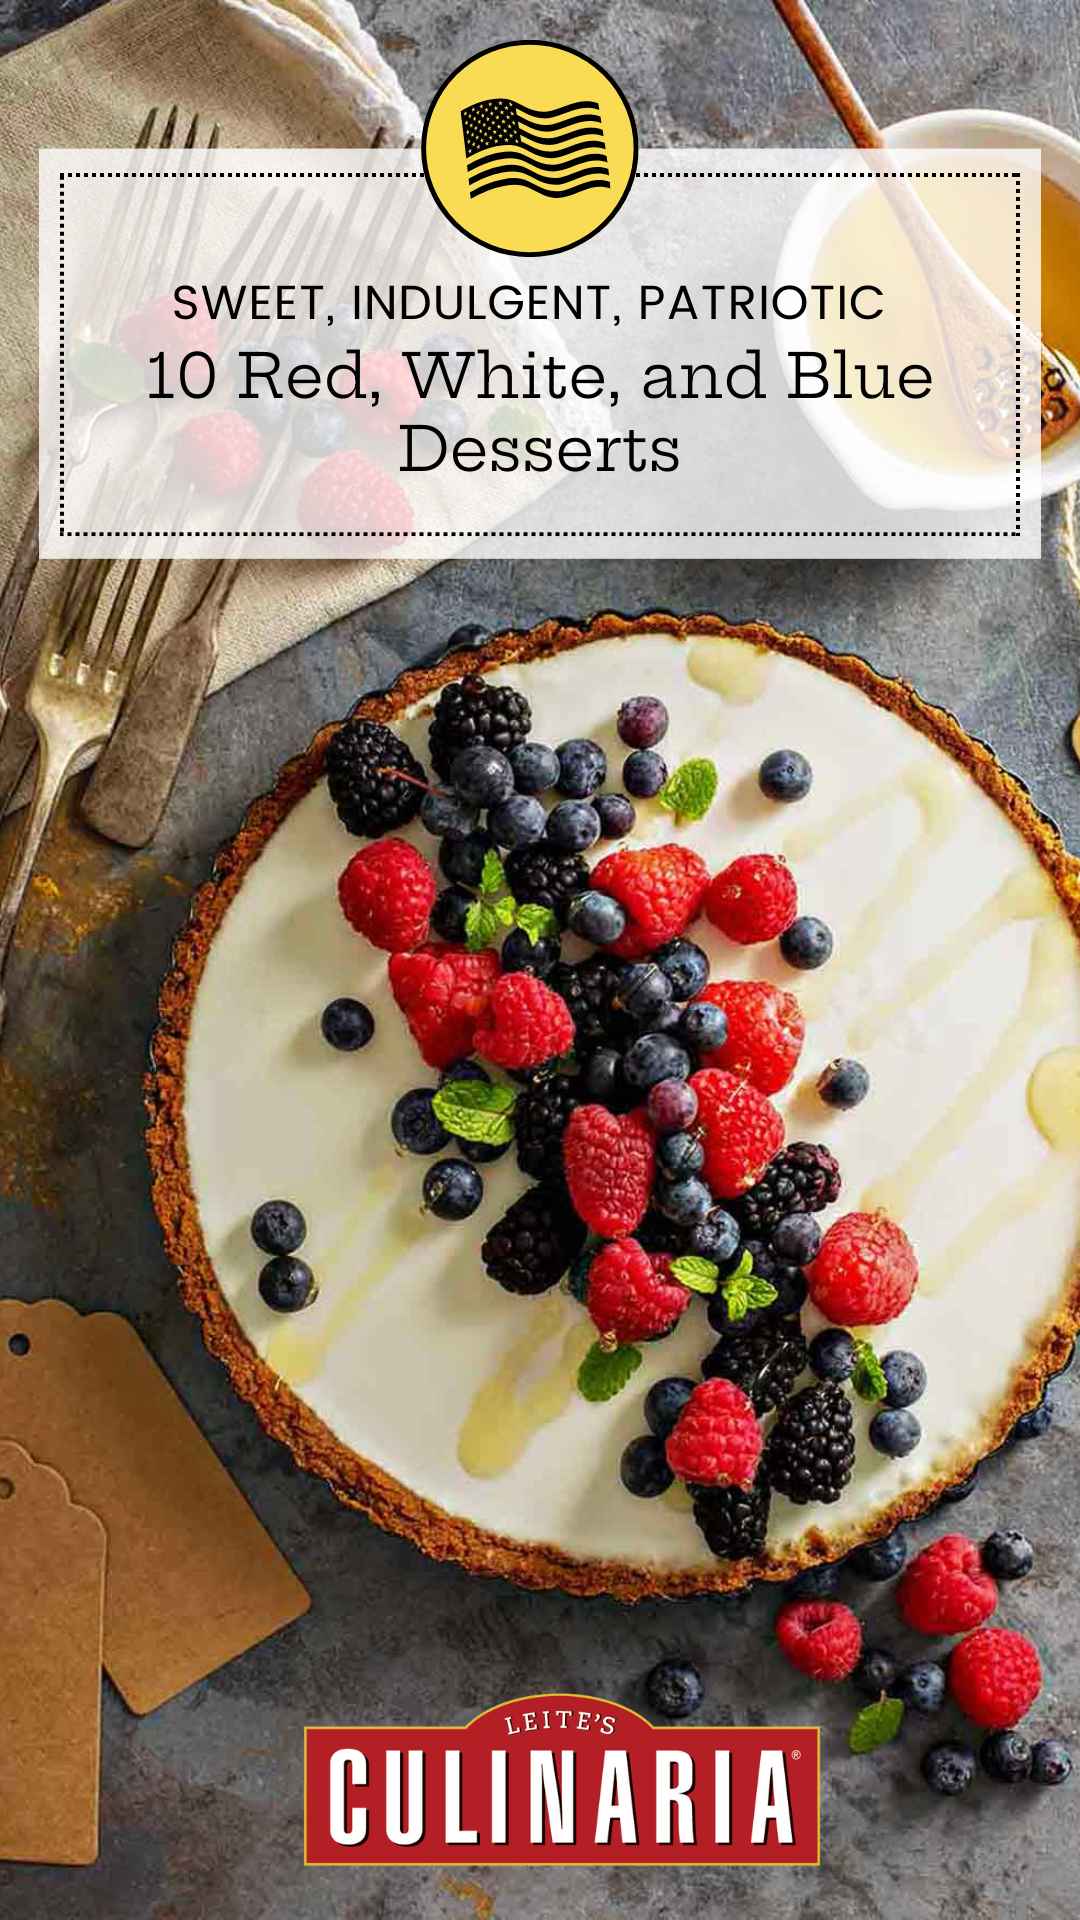 A tart topped with fresh berries and mint leaves.